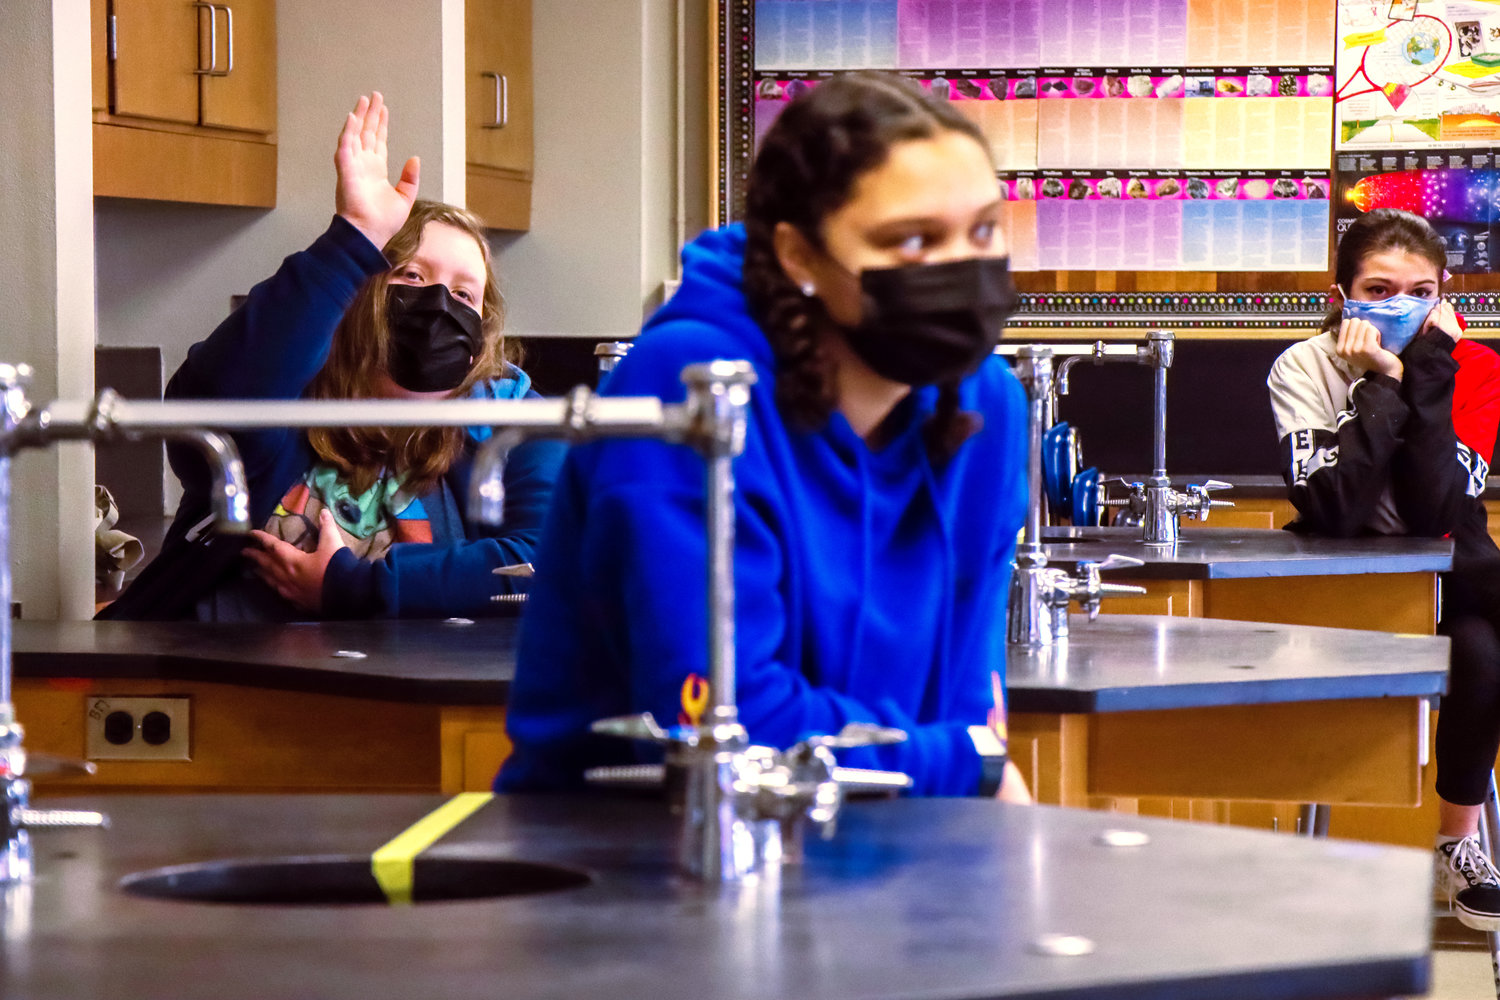 A student raises her hand during science class at Centralia Middle School Friday morning.